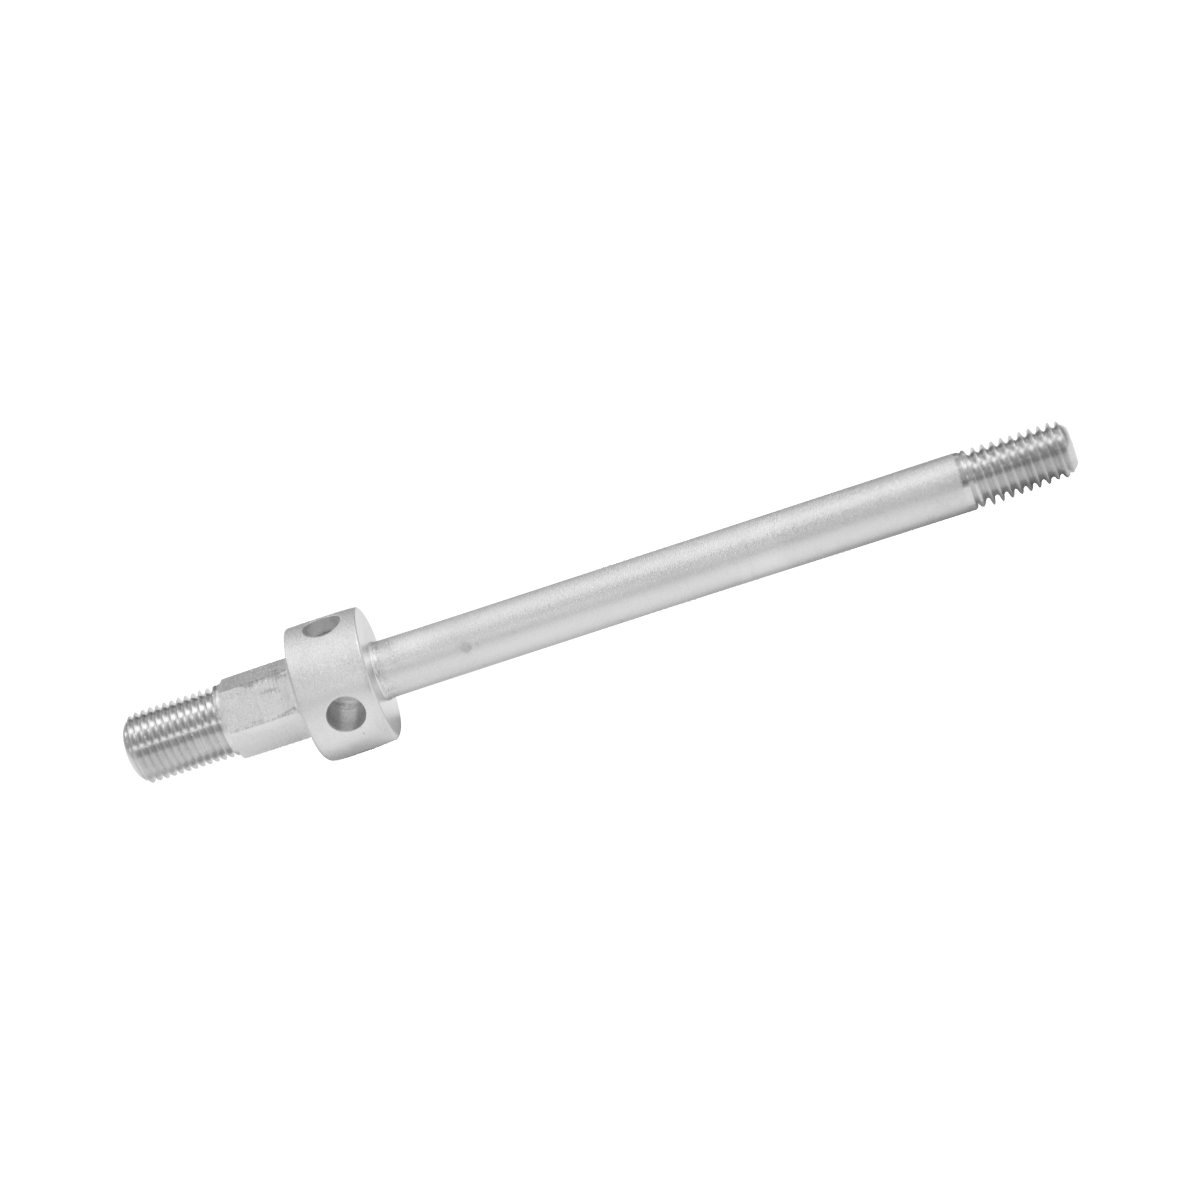 Conical Bolt for Tibia Nail (ADROIT)